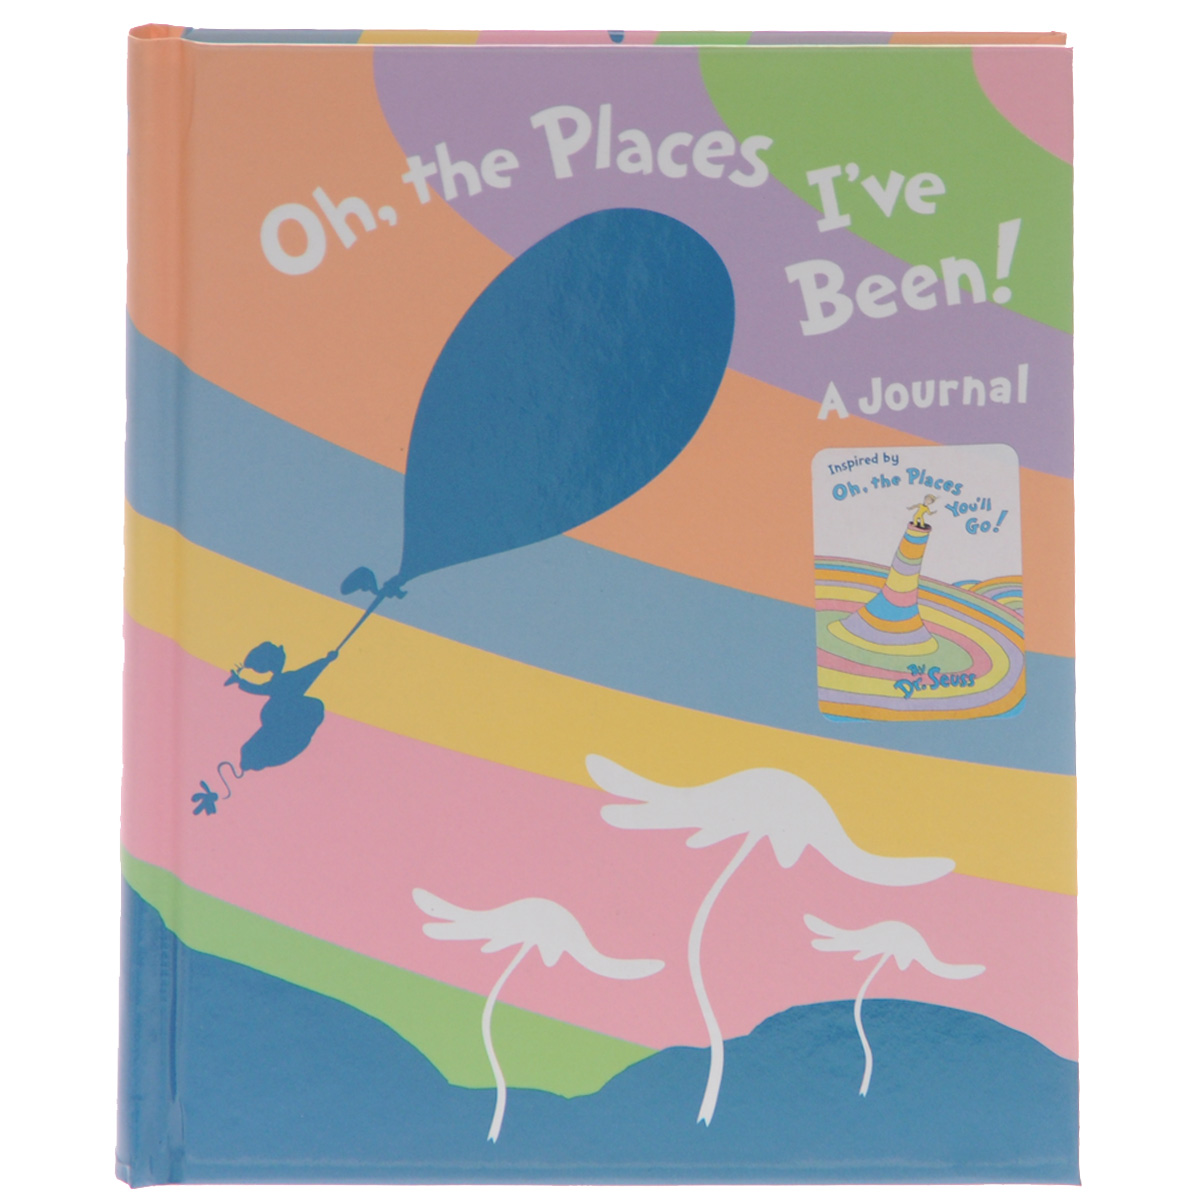 Oh, the Places I've Been! A Journal